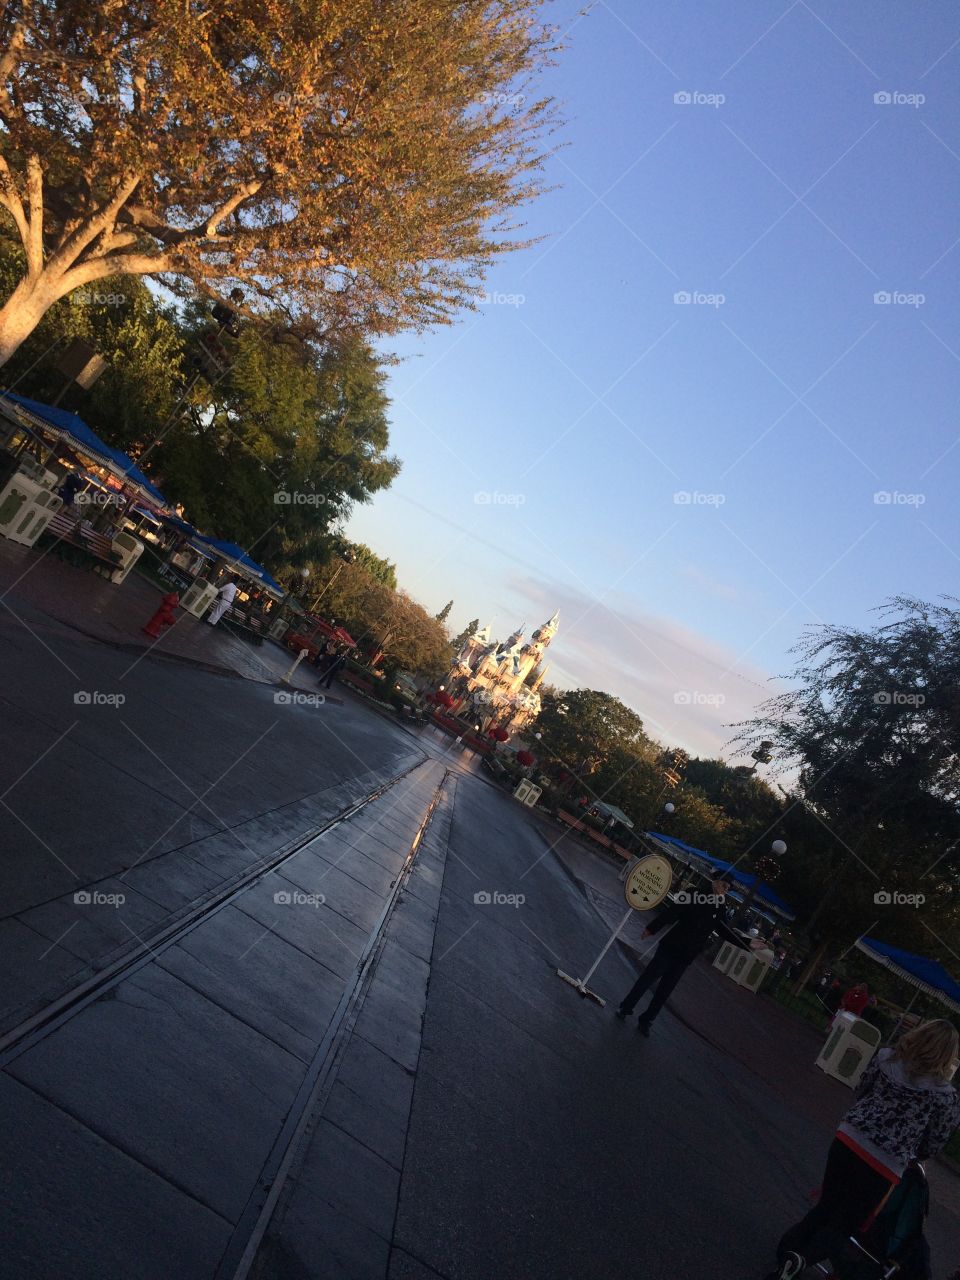 Magic Morning, first arrival to California's Disneyland 